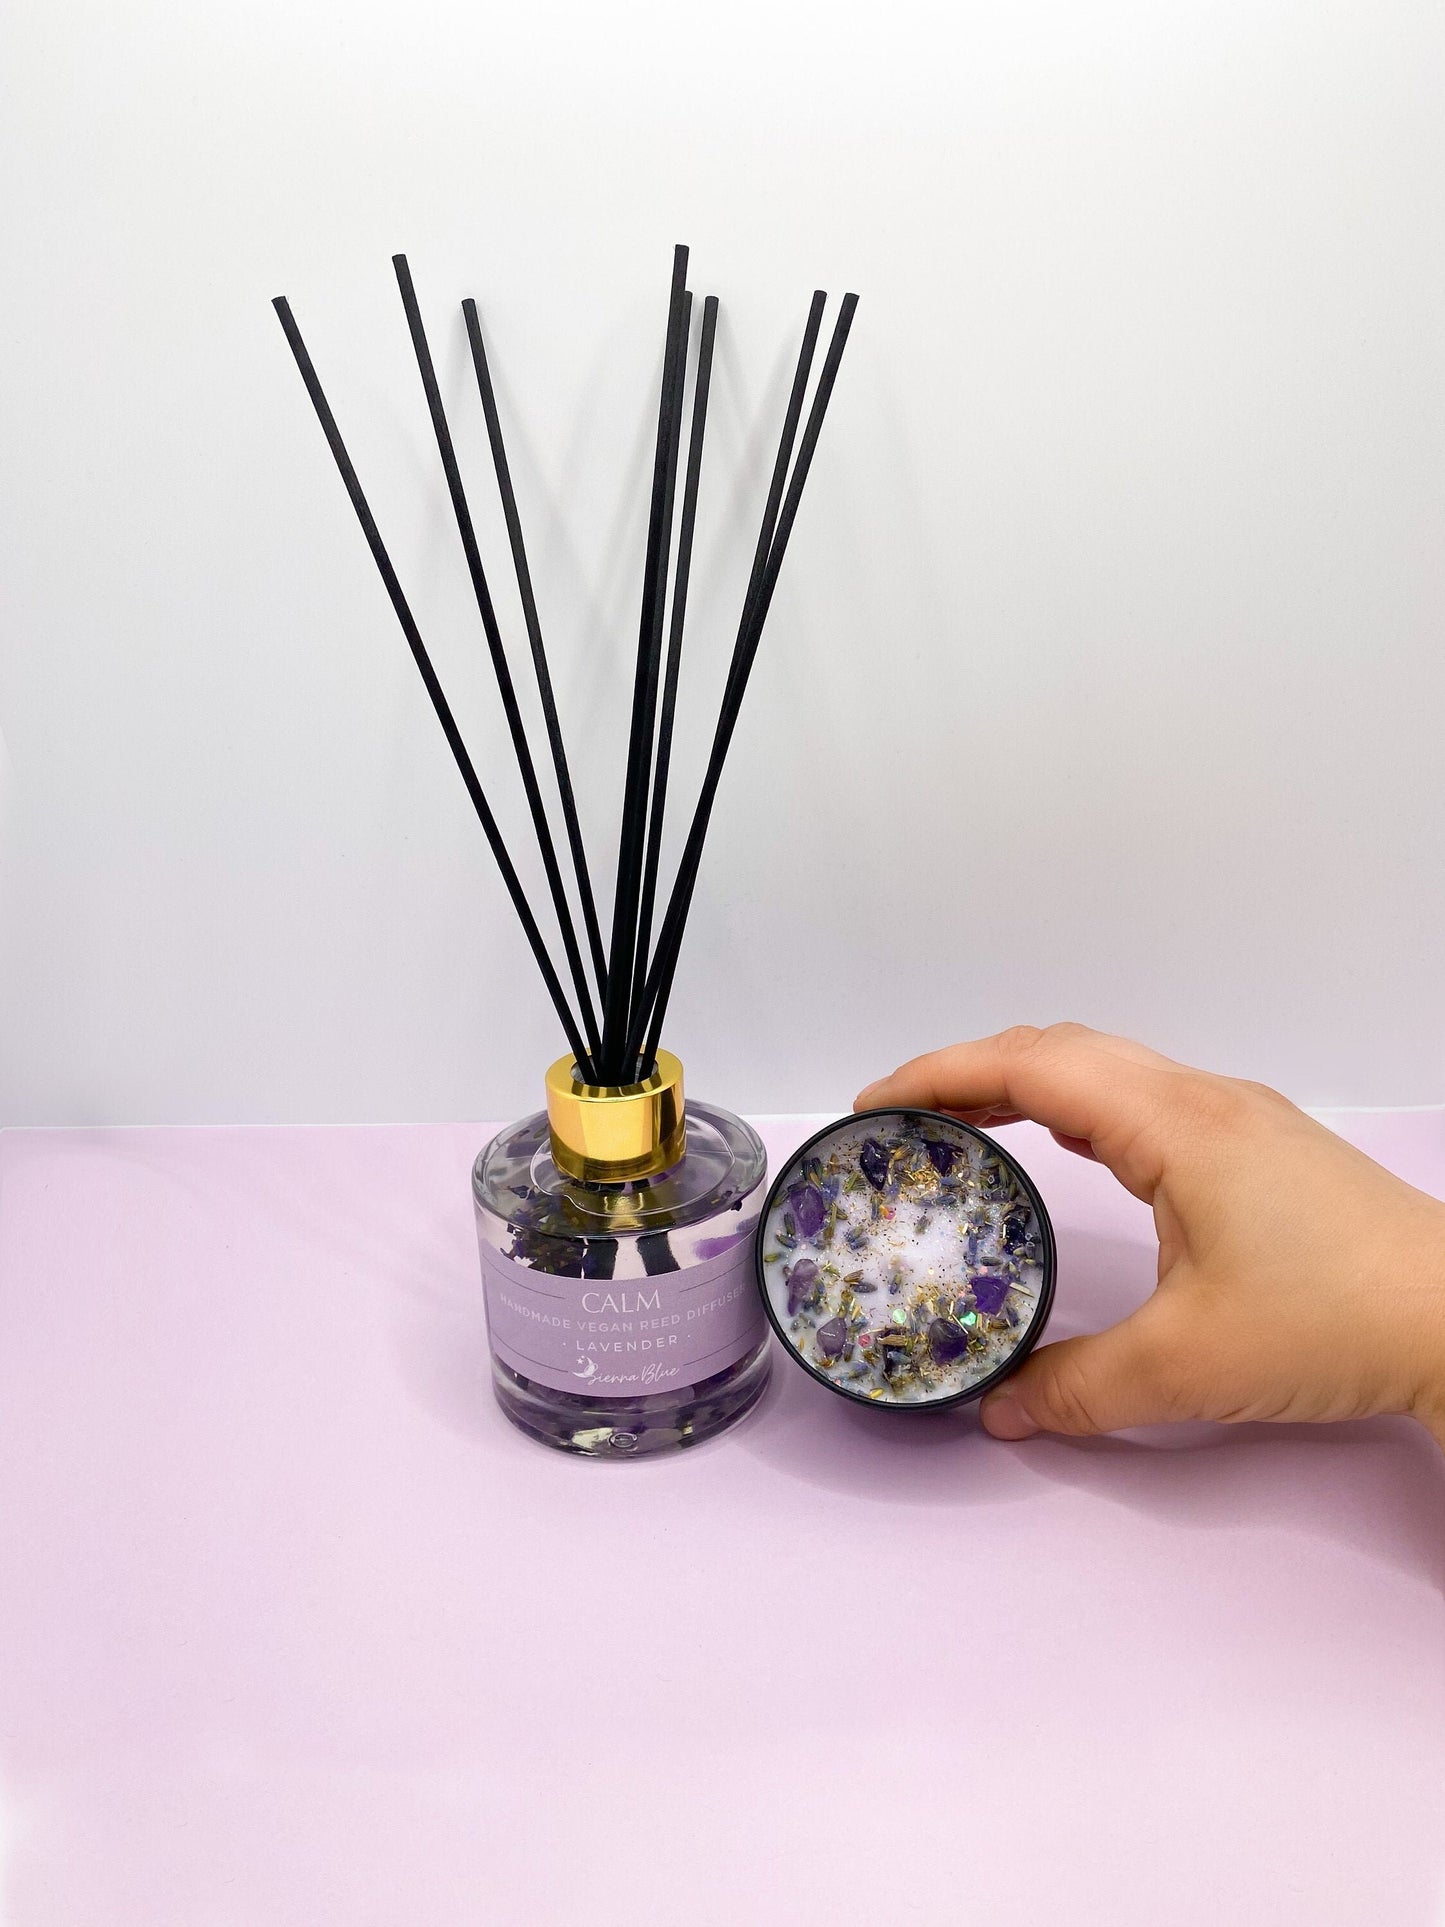 Calm candle and diffuser set